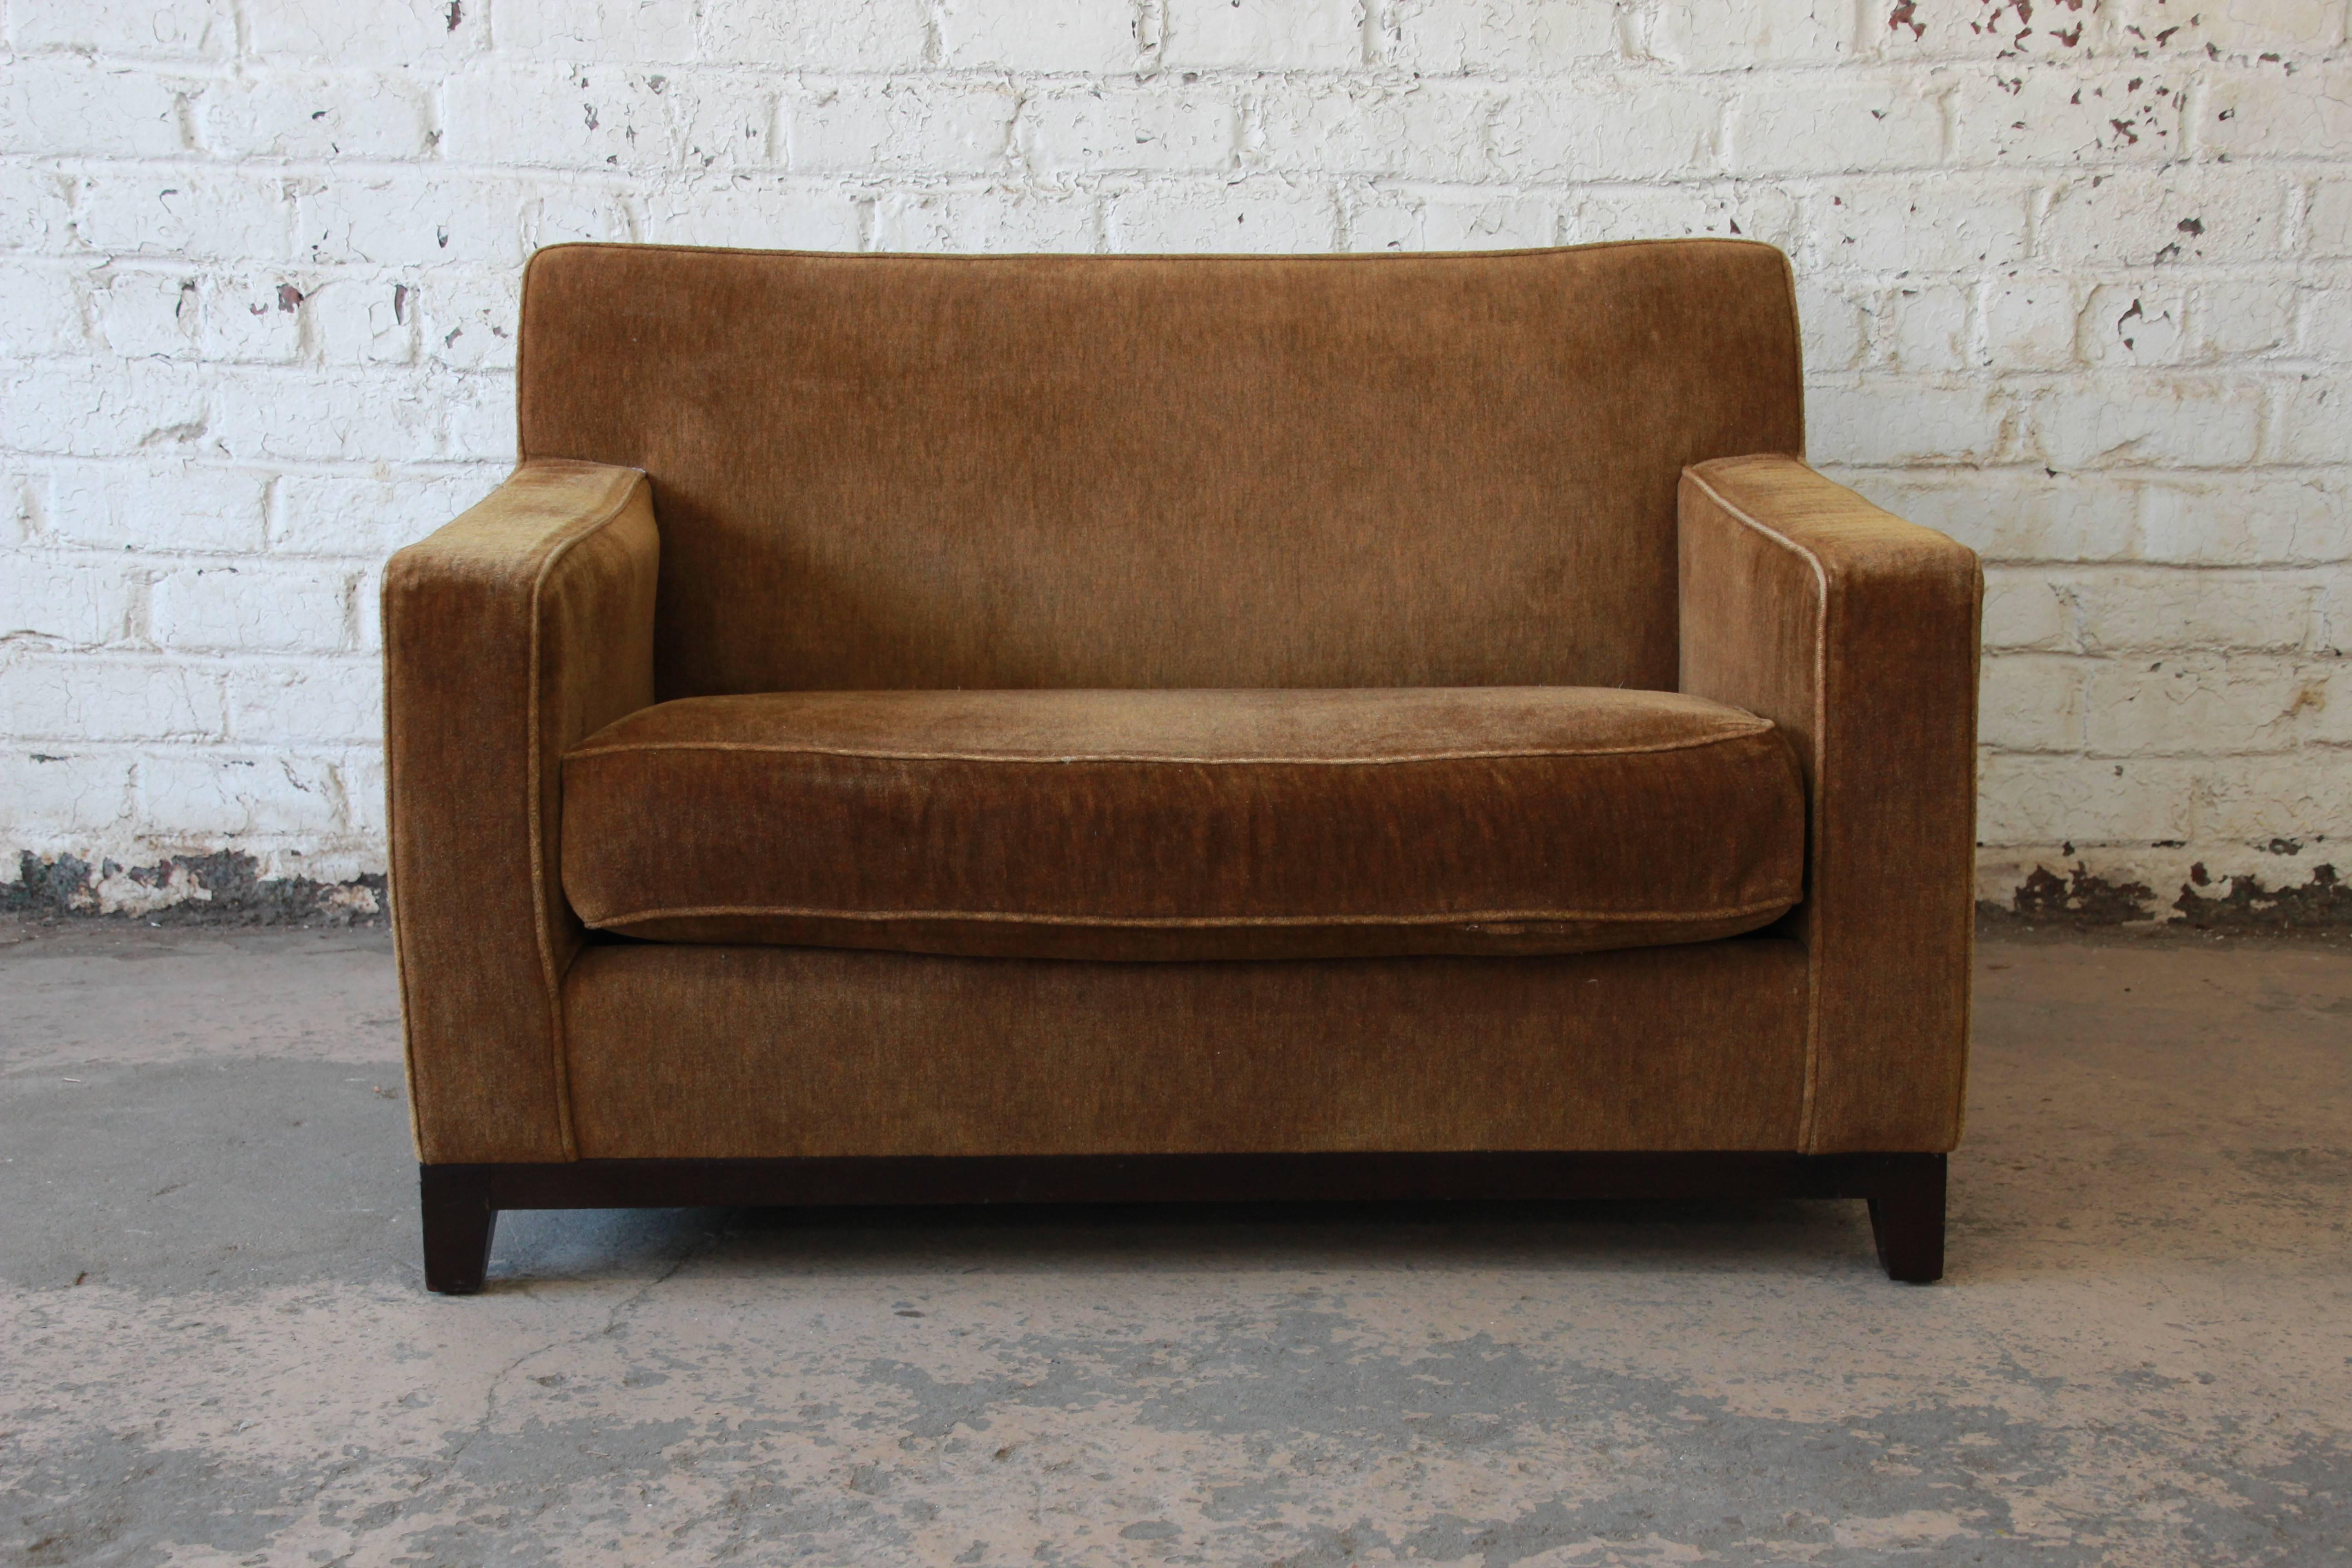 An exceptional modern oversized cube lounge chair or settee designed by Christian Liaigre for Holly Hunt. The chair is extremely comfortable and has a nice modern design with gorgeous brown mohair velvet upholstery. Original label is present. The